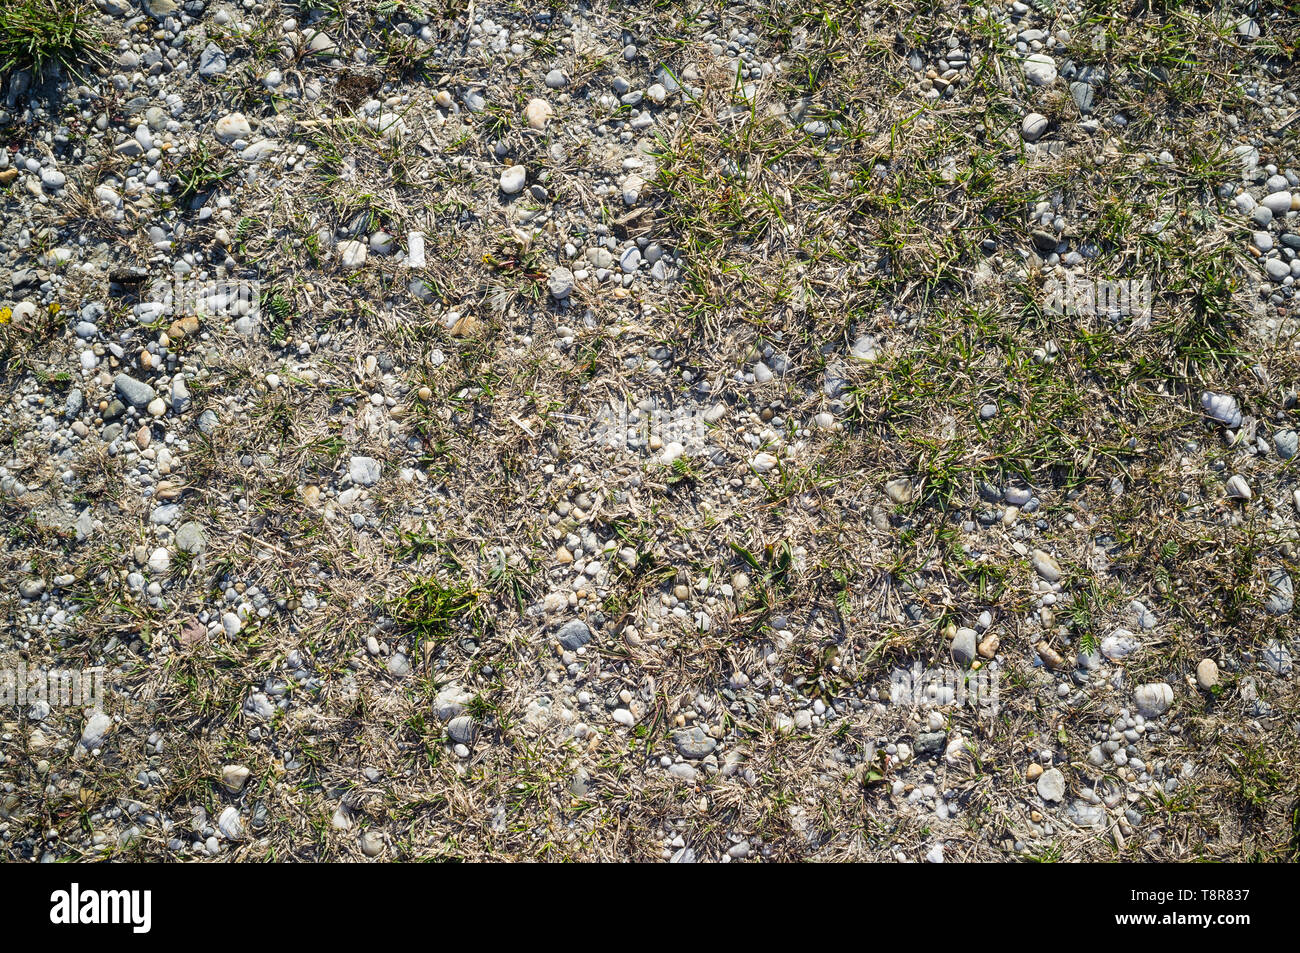 Texture of Lake Shore with Sand and Pebbles overgrown with Weeds Stock Photo